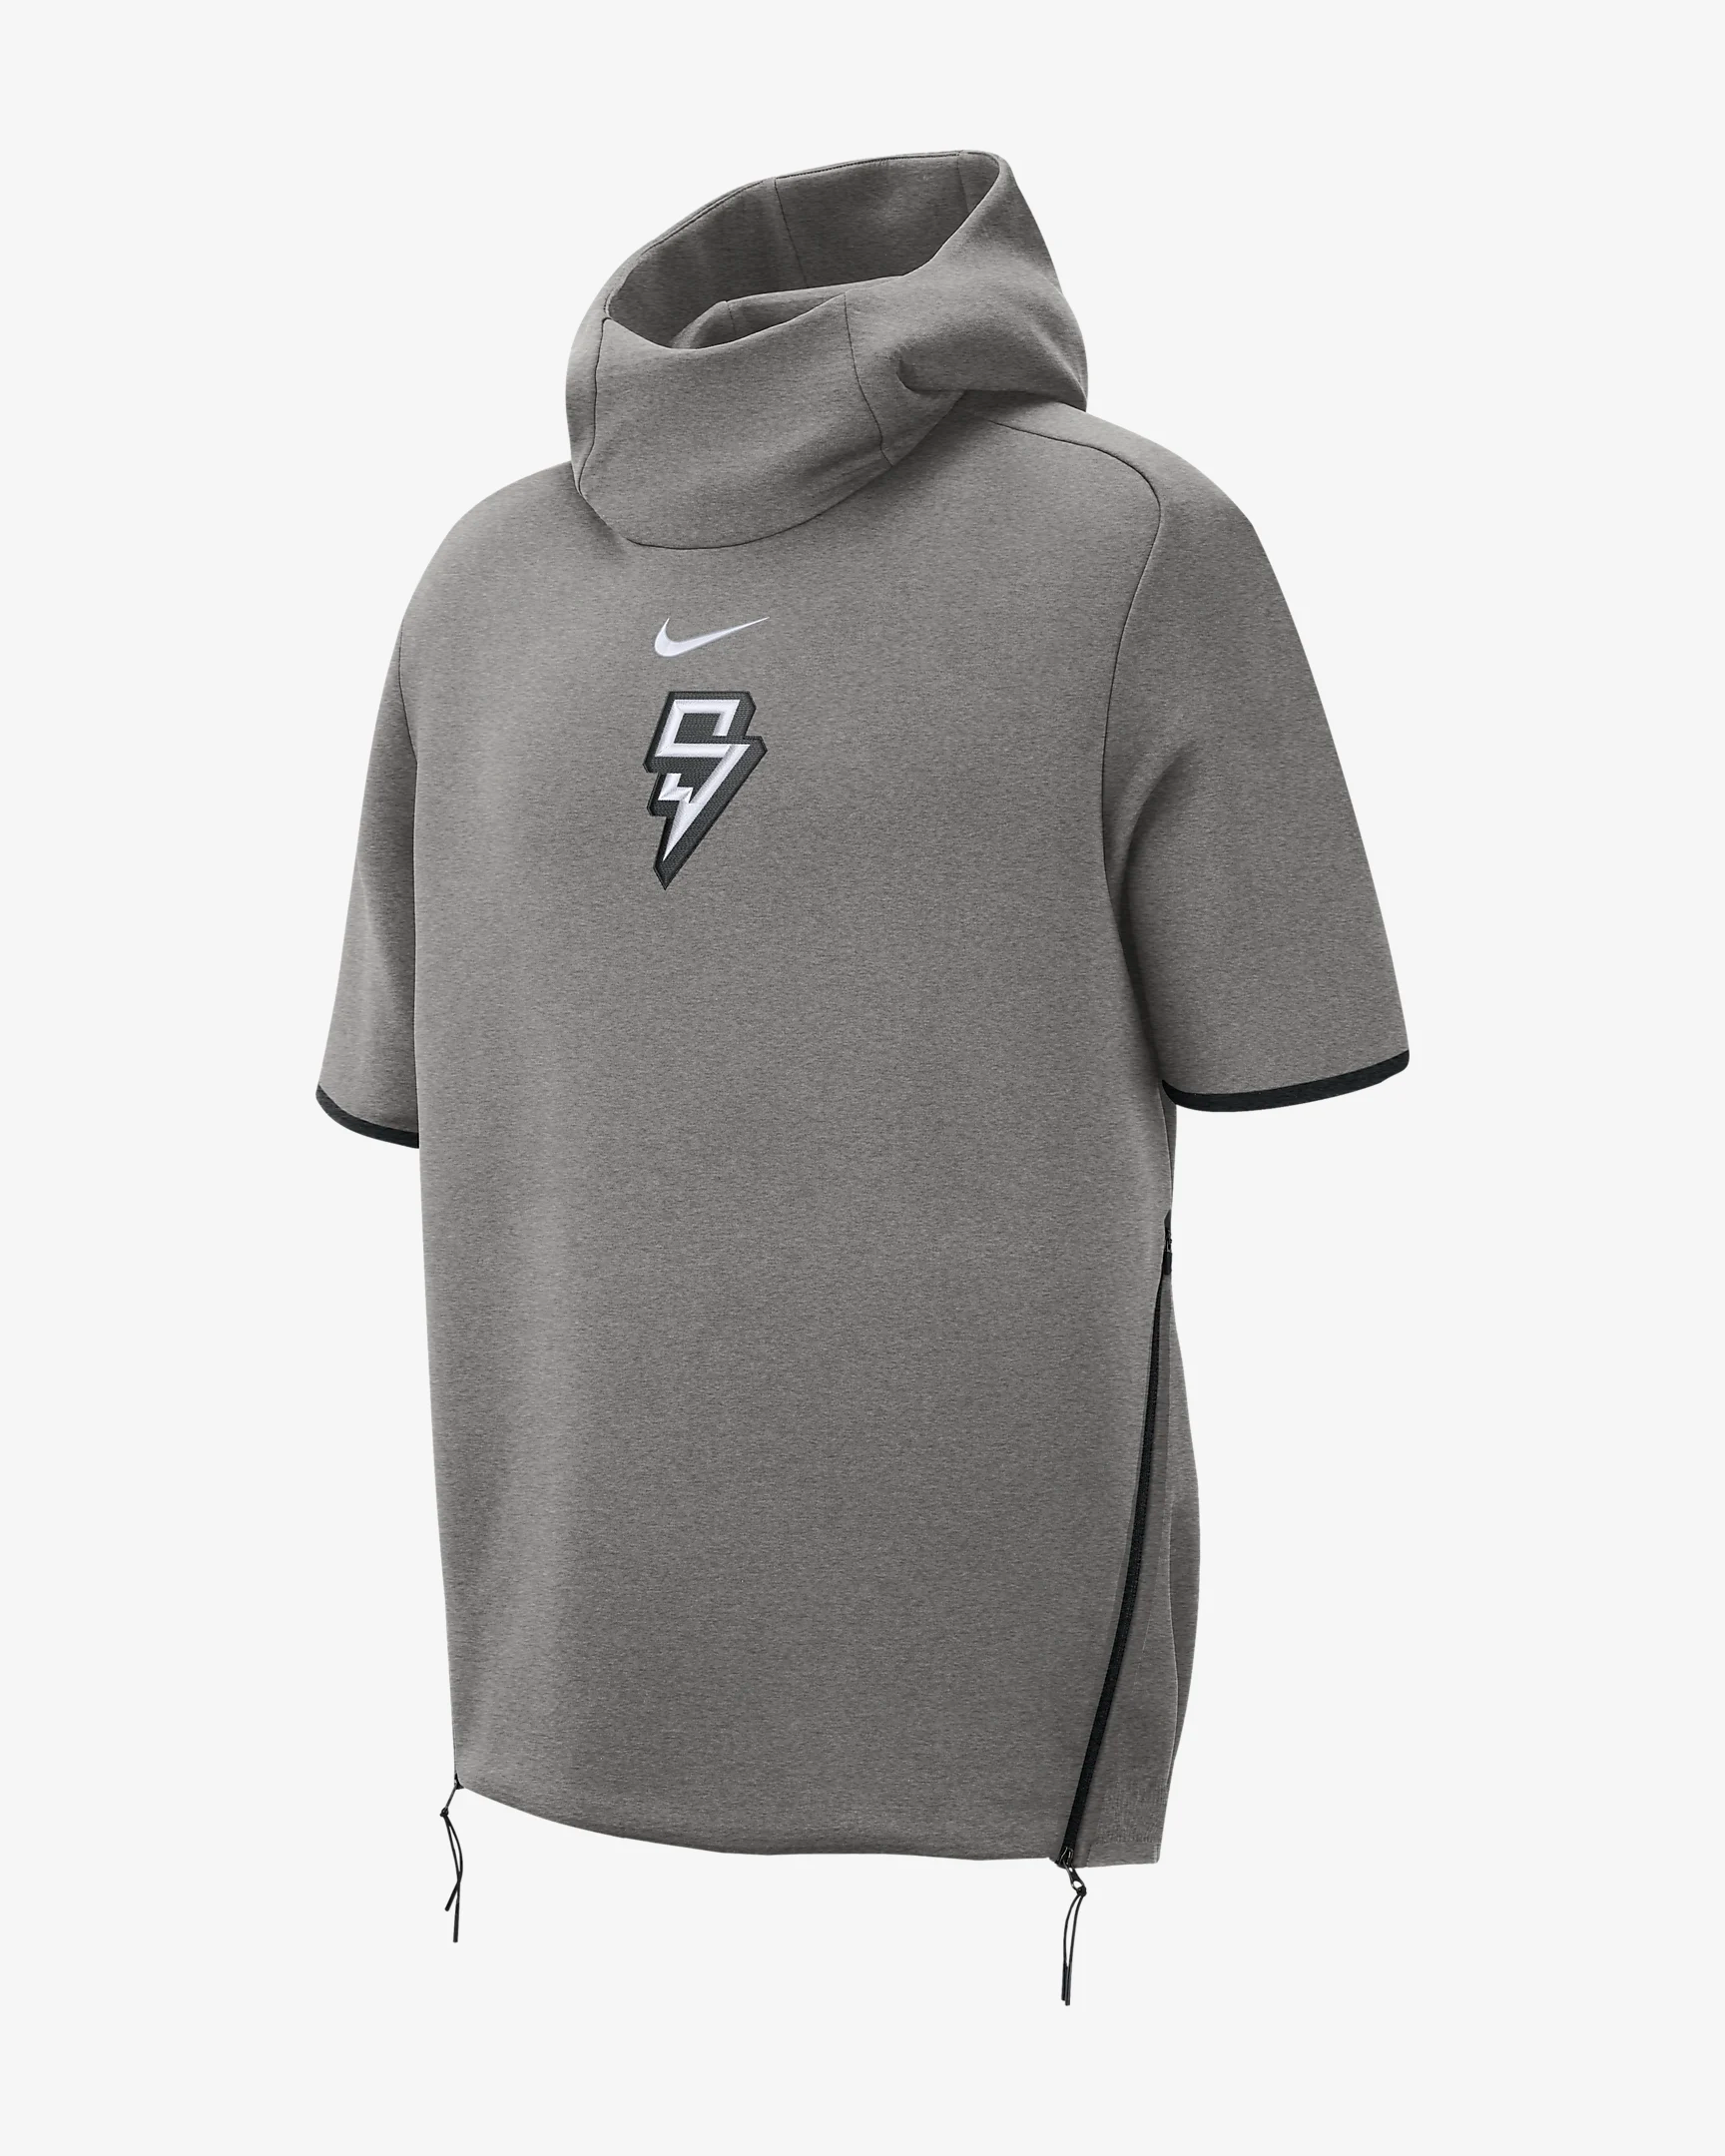 showout-saquon-mens-short-sleeve-hoodie-xPS0dl.png